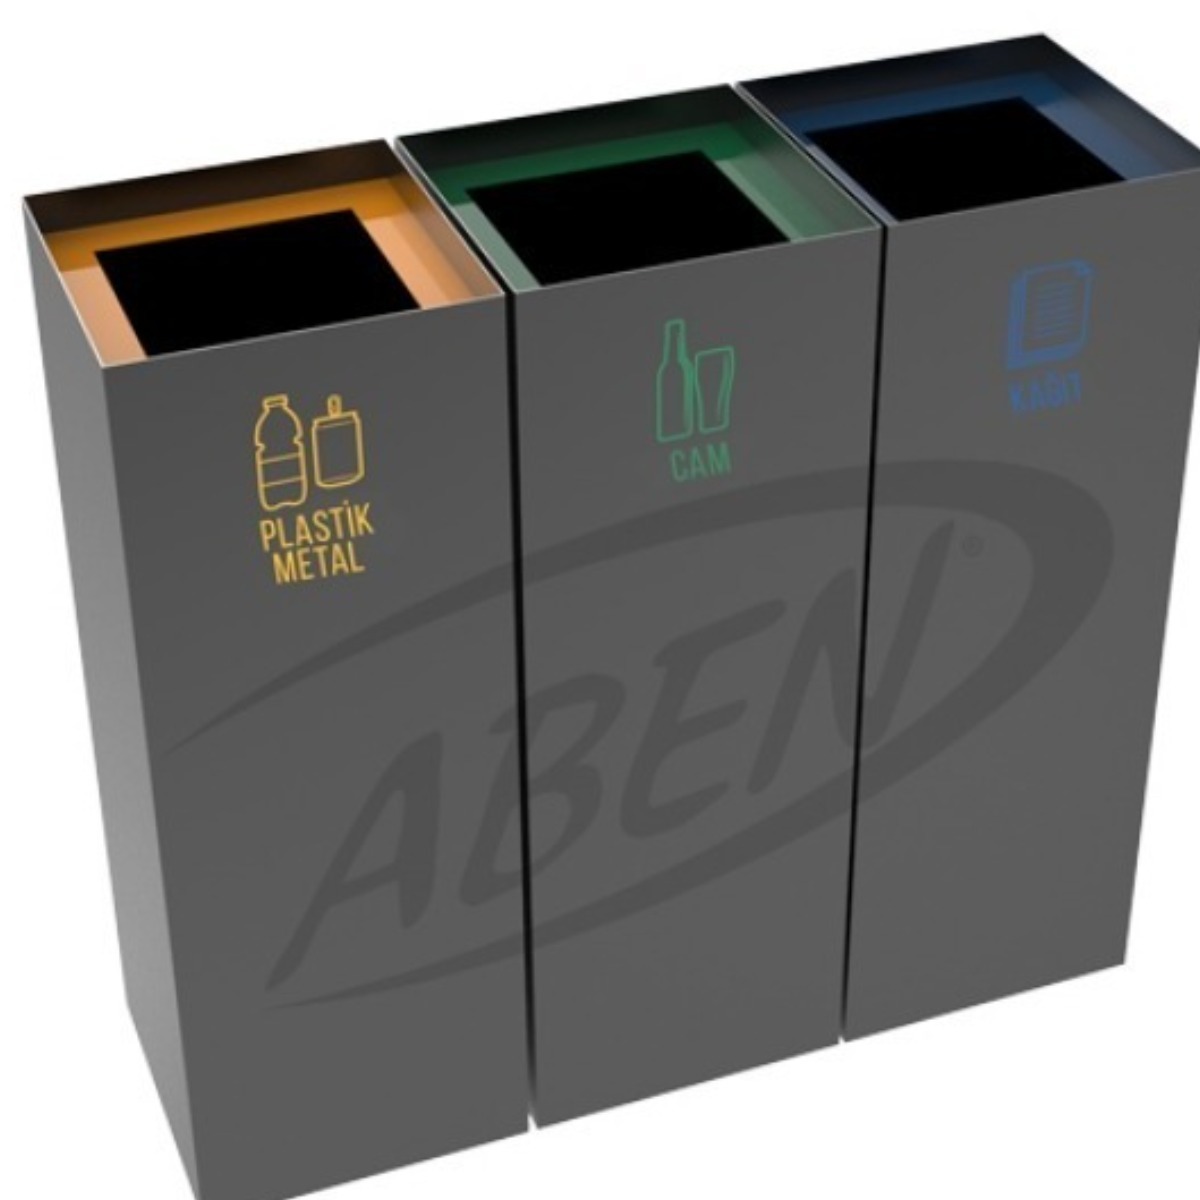 AB-792 3'Part Recycle Bin product logo